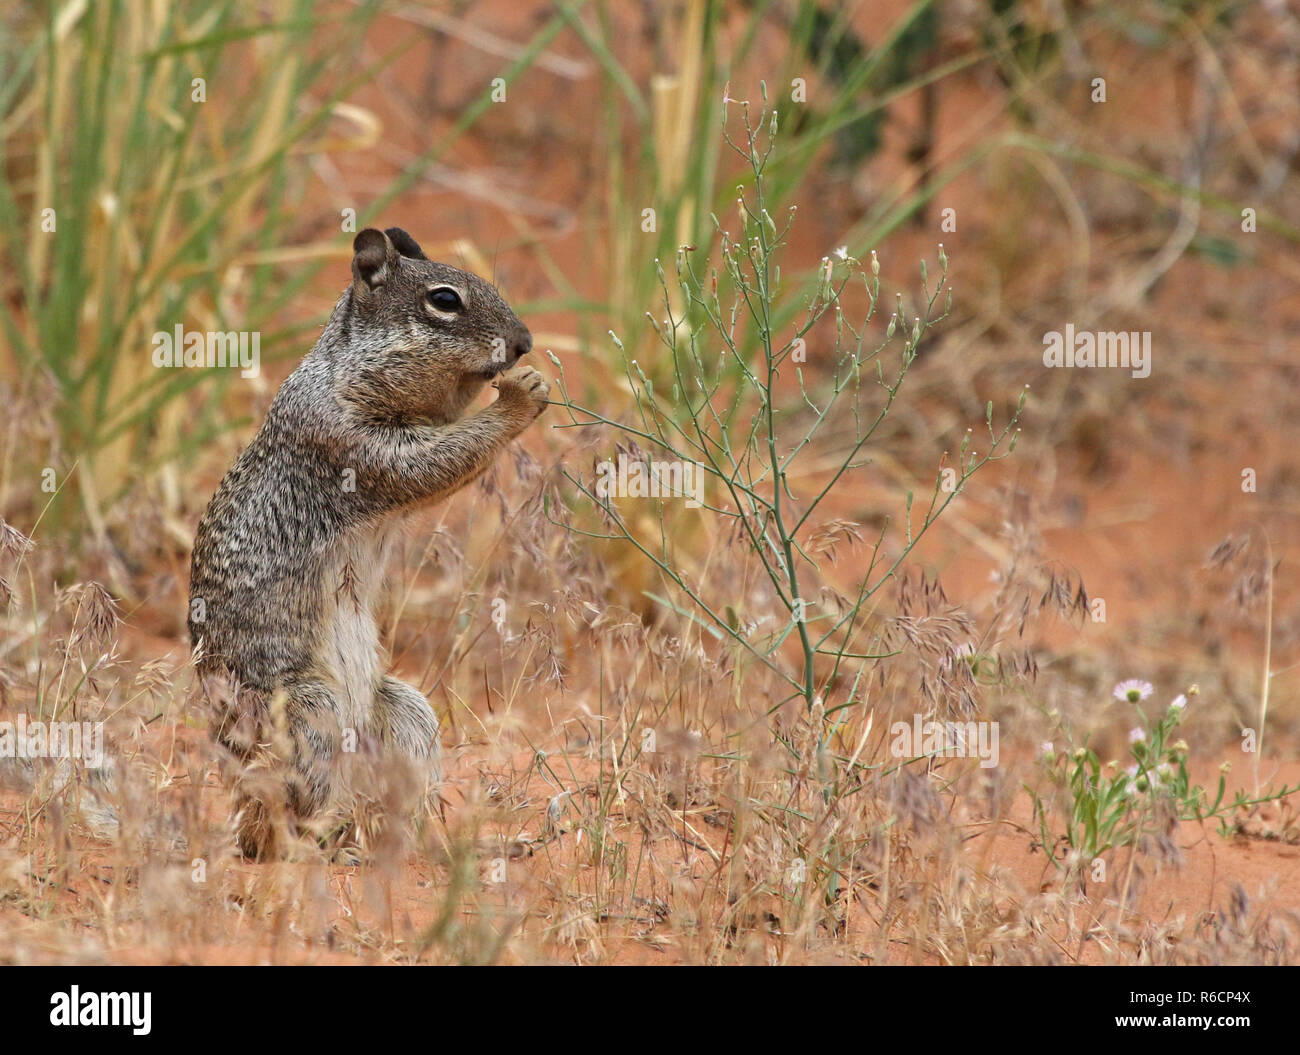 A Rock Squirrel (Otospermophilus variegatus) feeding on some weeds.  Shot in Arches National Park, Utah. Stock Photo